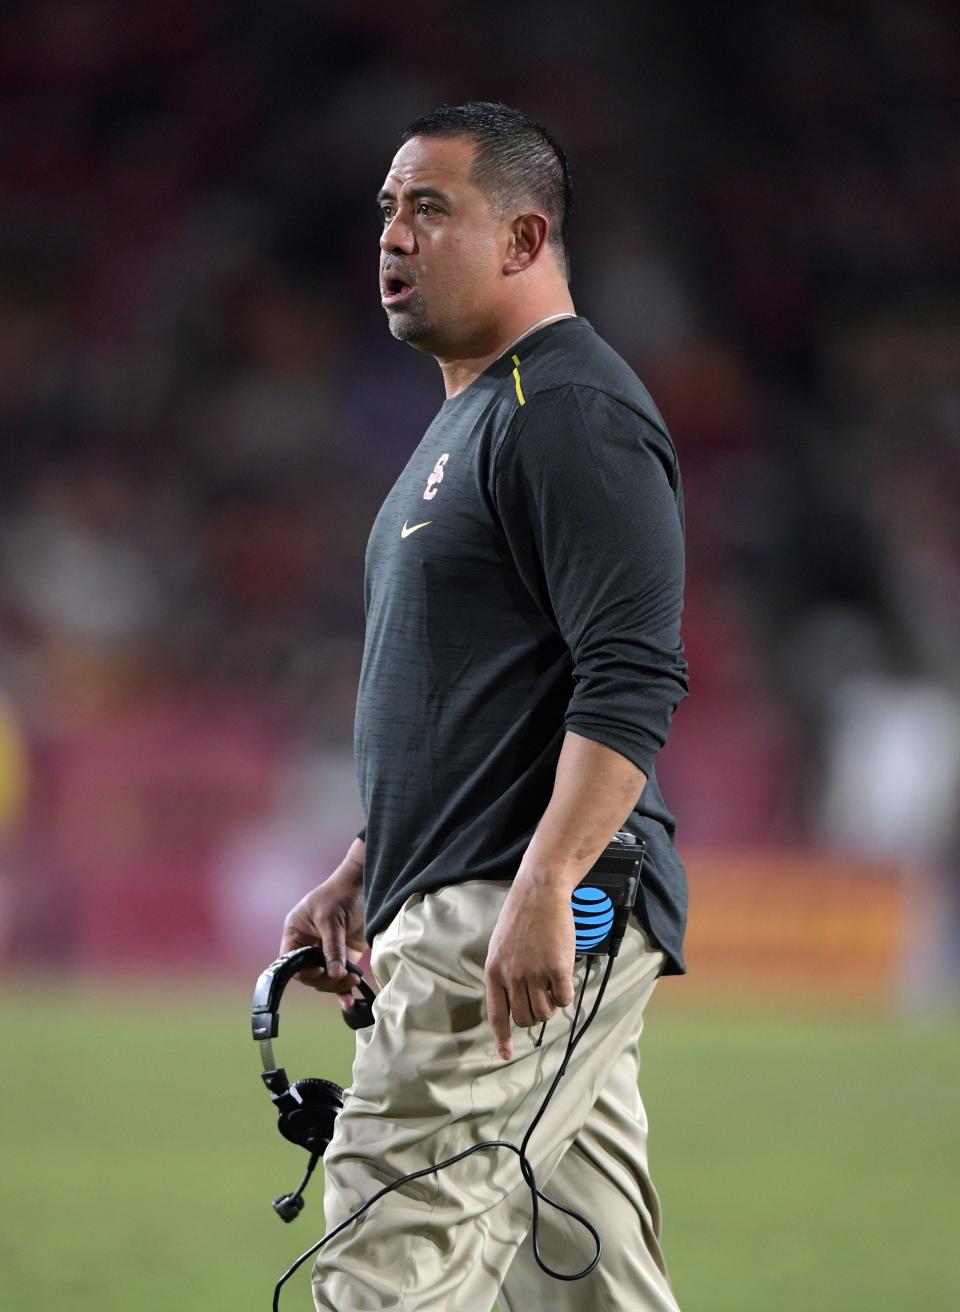 Southern California linebackers coach Johnny Nansen reacts during the Trojans' win over Arizona at Los Angeles Memorial Coliseum in 2017.